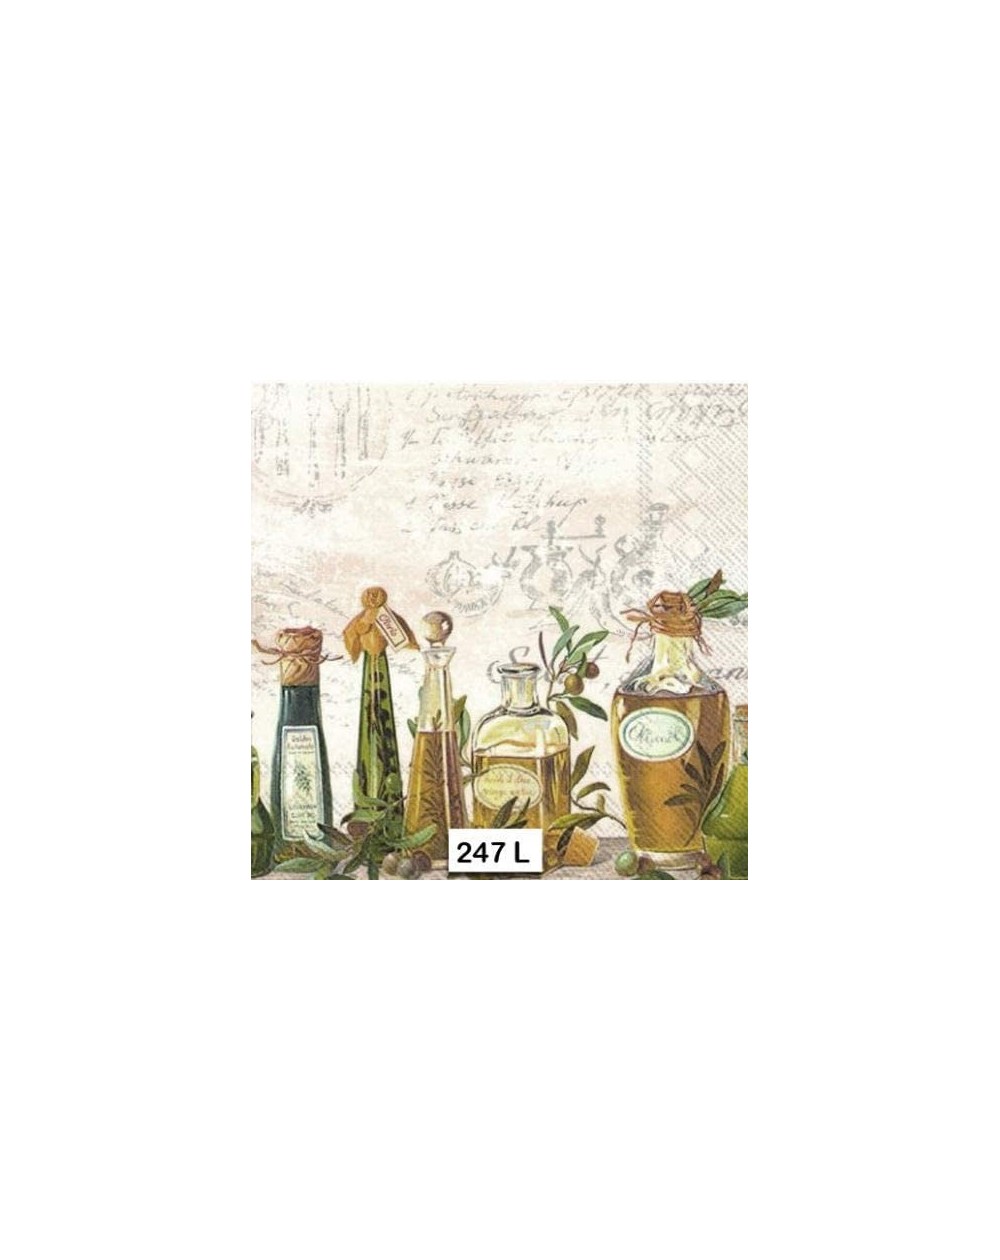 Tableware Two Individual Paper Luncheon Decoupage Napkins - Olive Oil Cooking - C1197XMCML8 $11.44